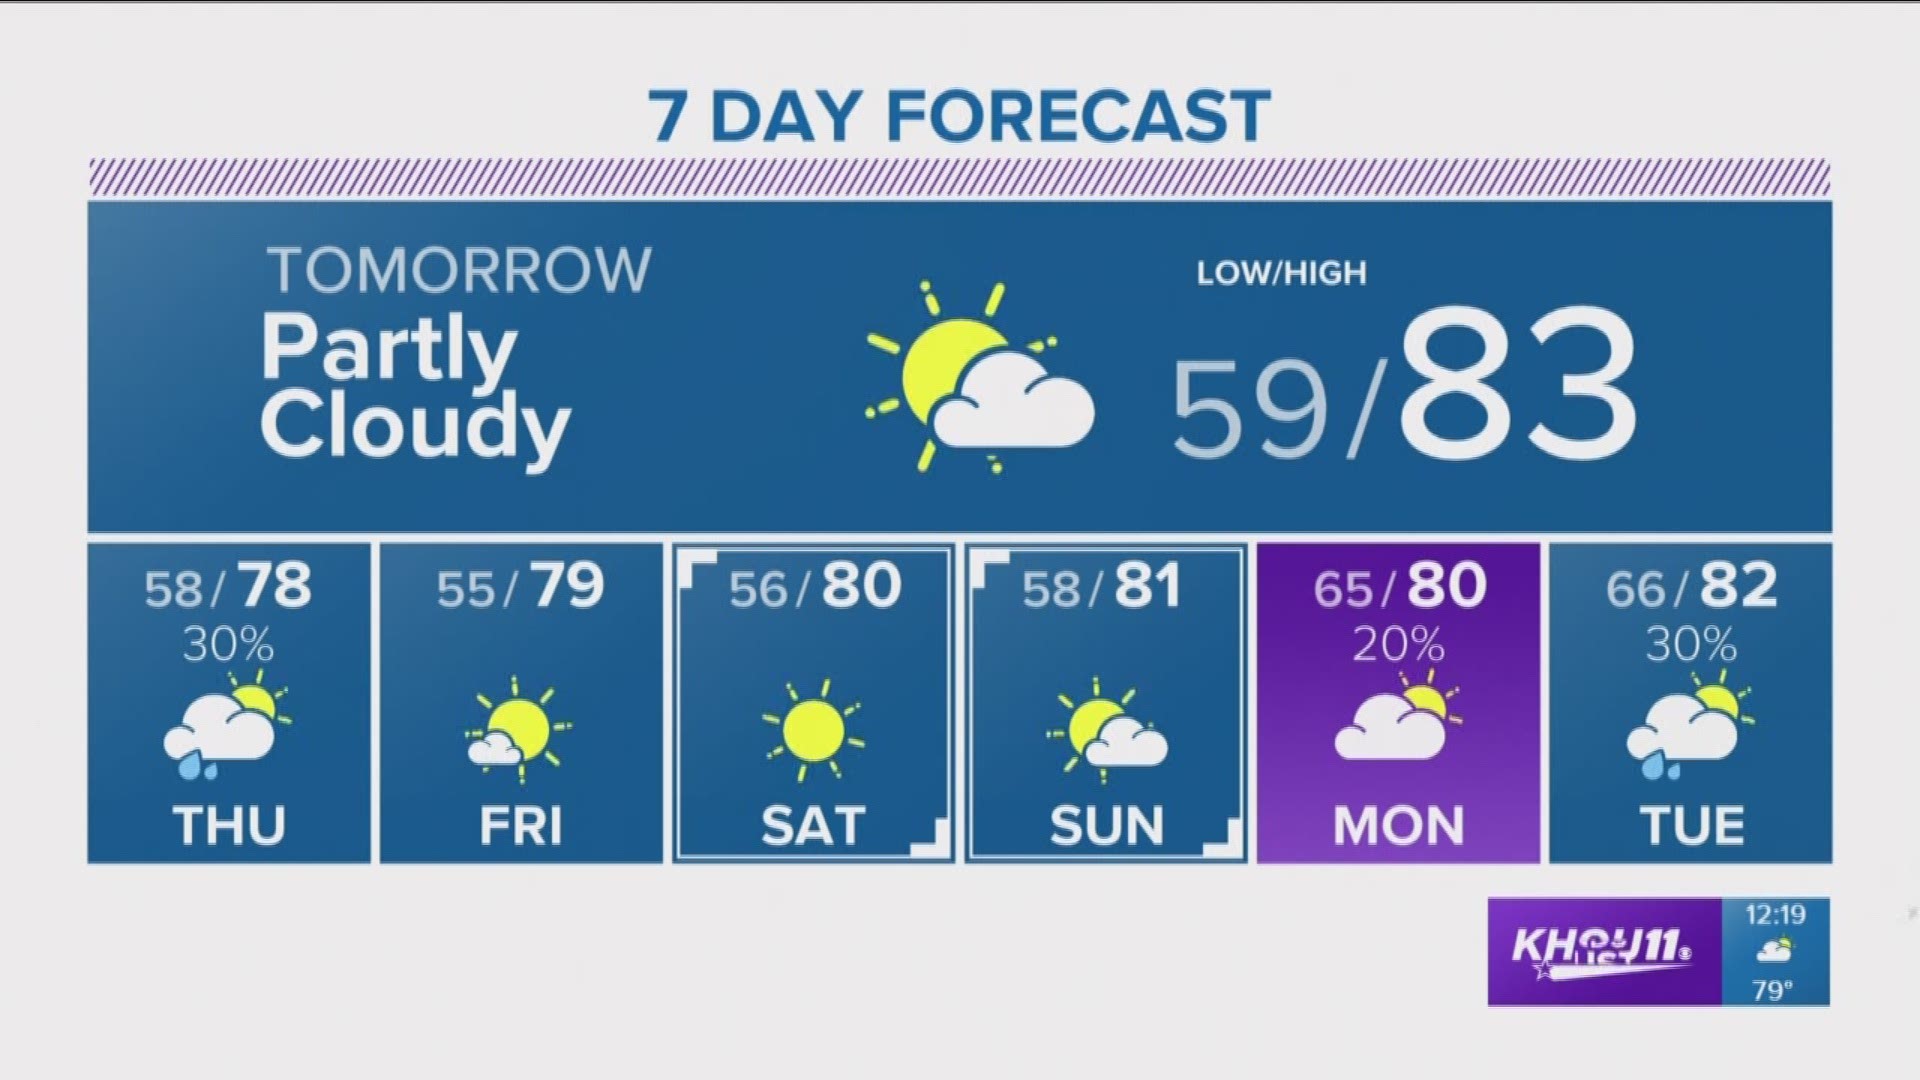 KHOU 11 Weather Reporter Blake Mathews says we will be in the mid-80s with plenty of sunshine. We will have clear skies, light winds and dry air most of Tuesday. 